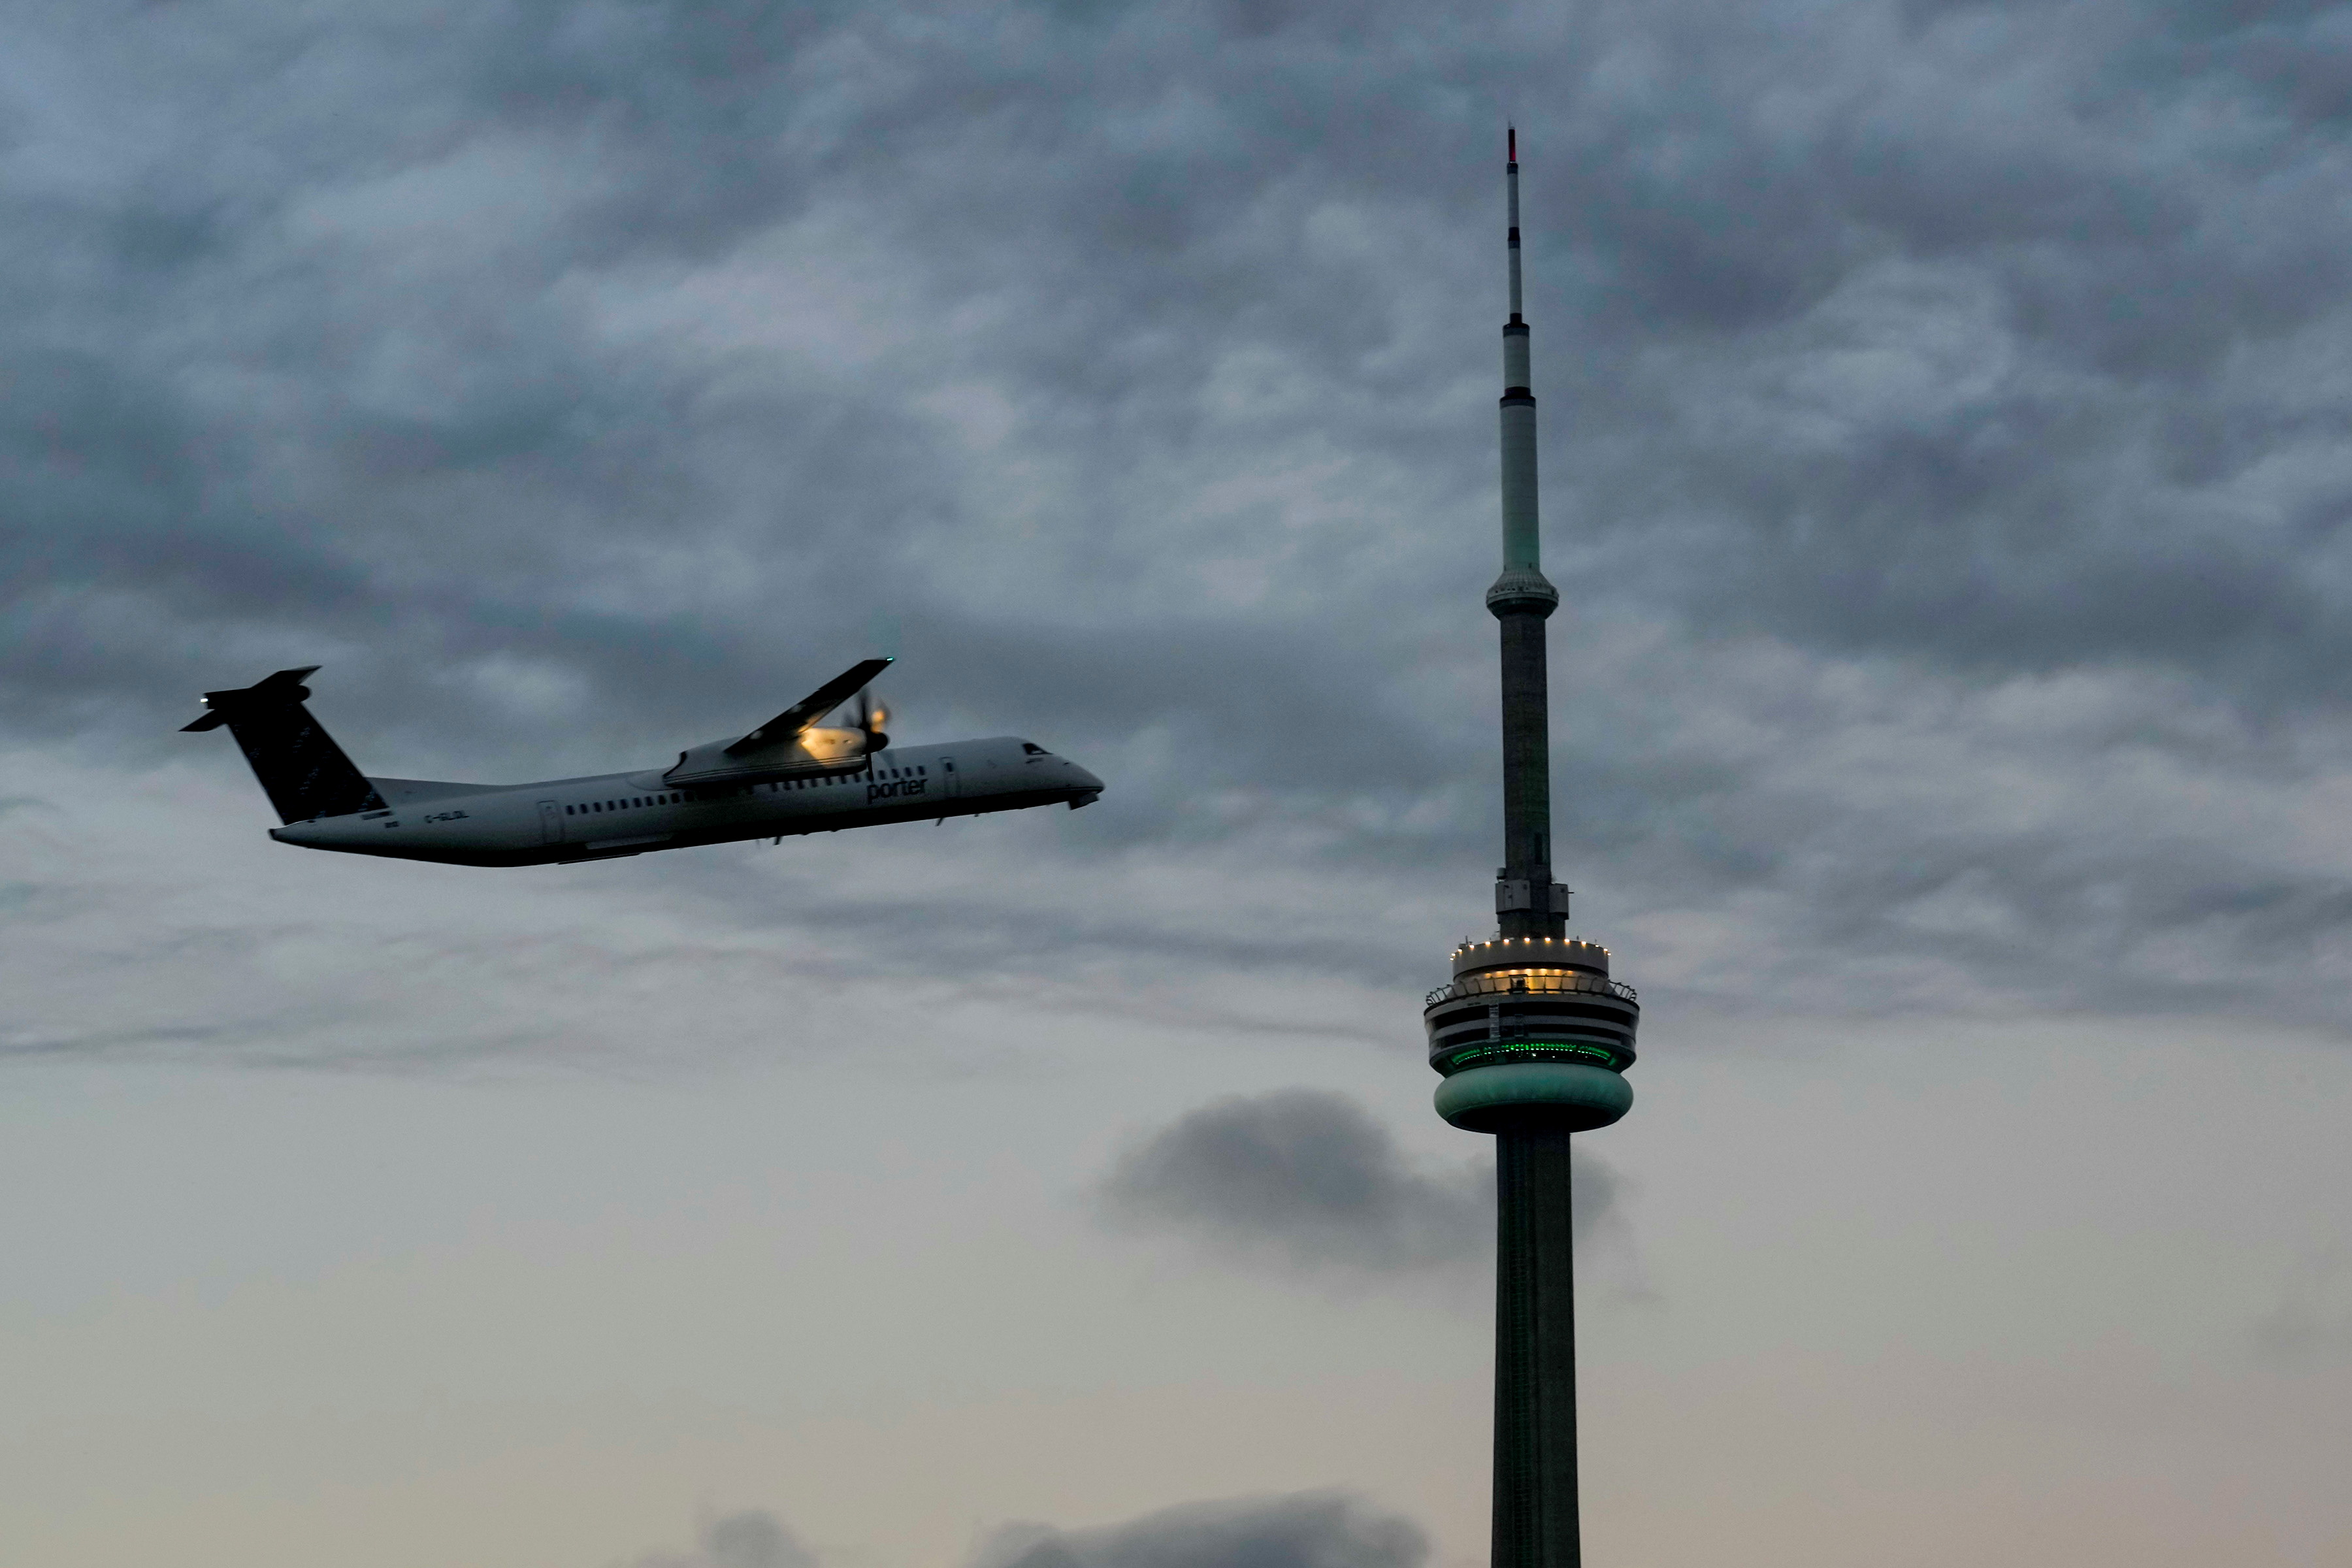 An airplane takes off from Billy Bishop Airport after Canada's Prime Minister Justin Trudeau announced that passengers will require COVID-19 vaccination for air, ship and interprovincial train services, in Toronto, Ontario, Canada October 6, 2021.  REUTERS/Carlos Osorio